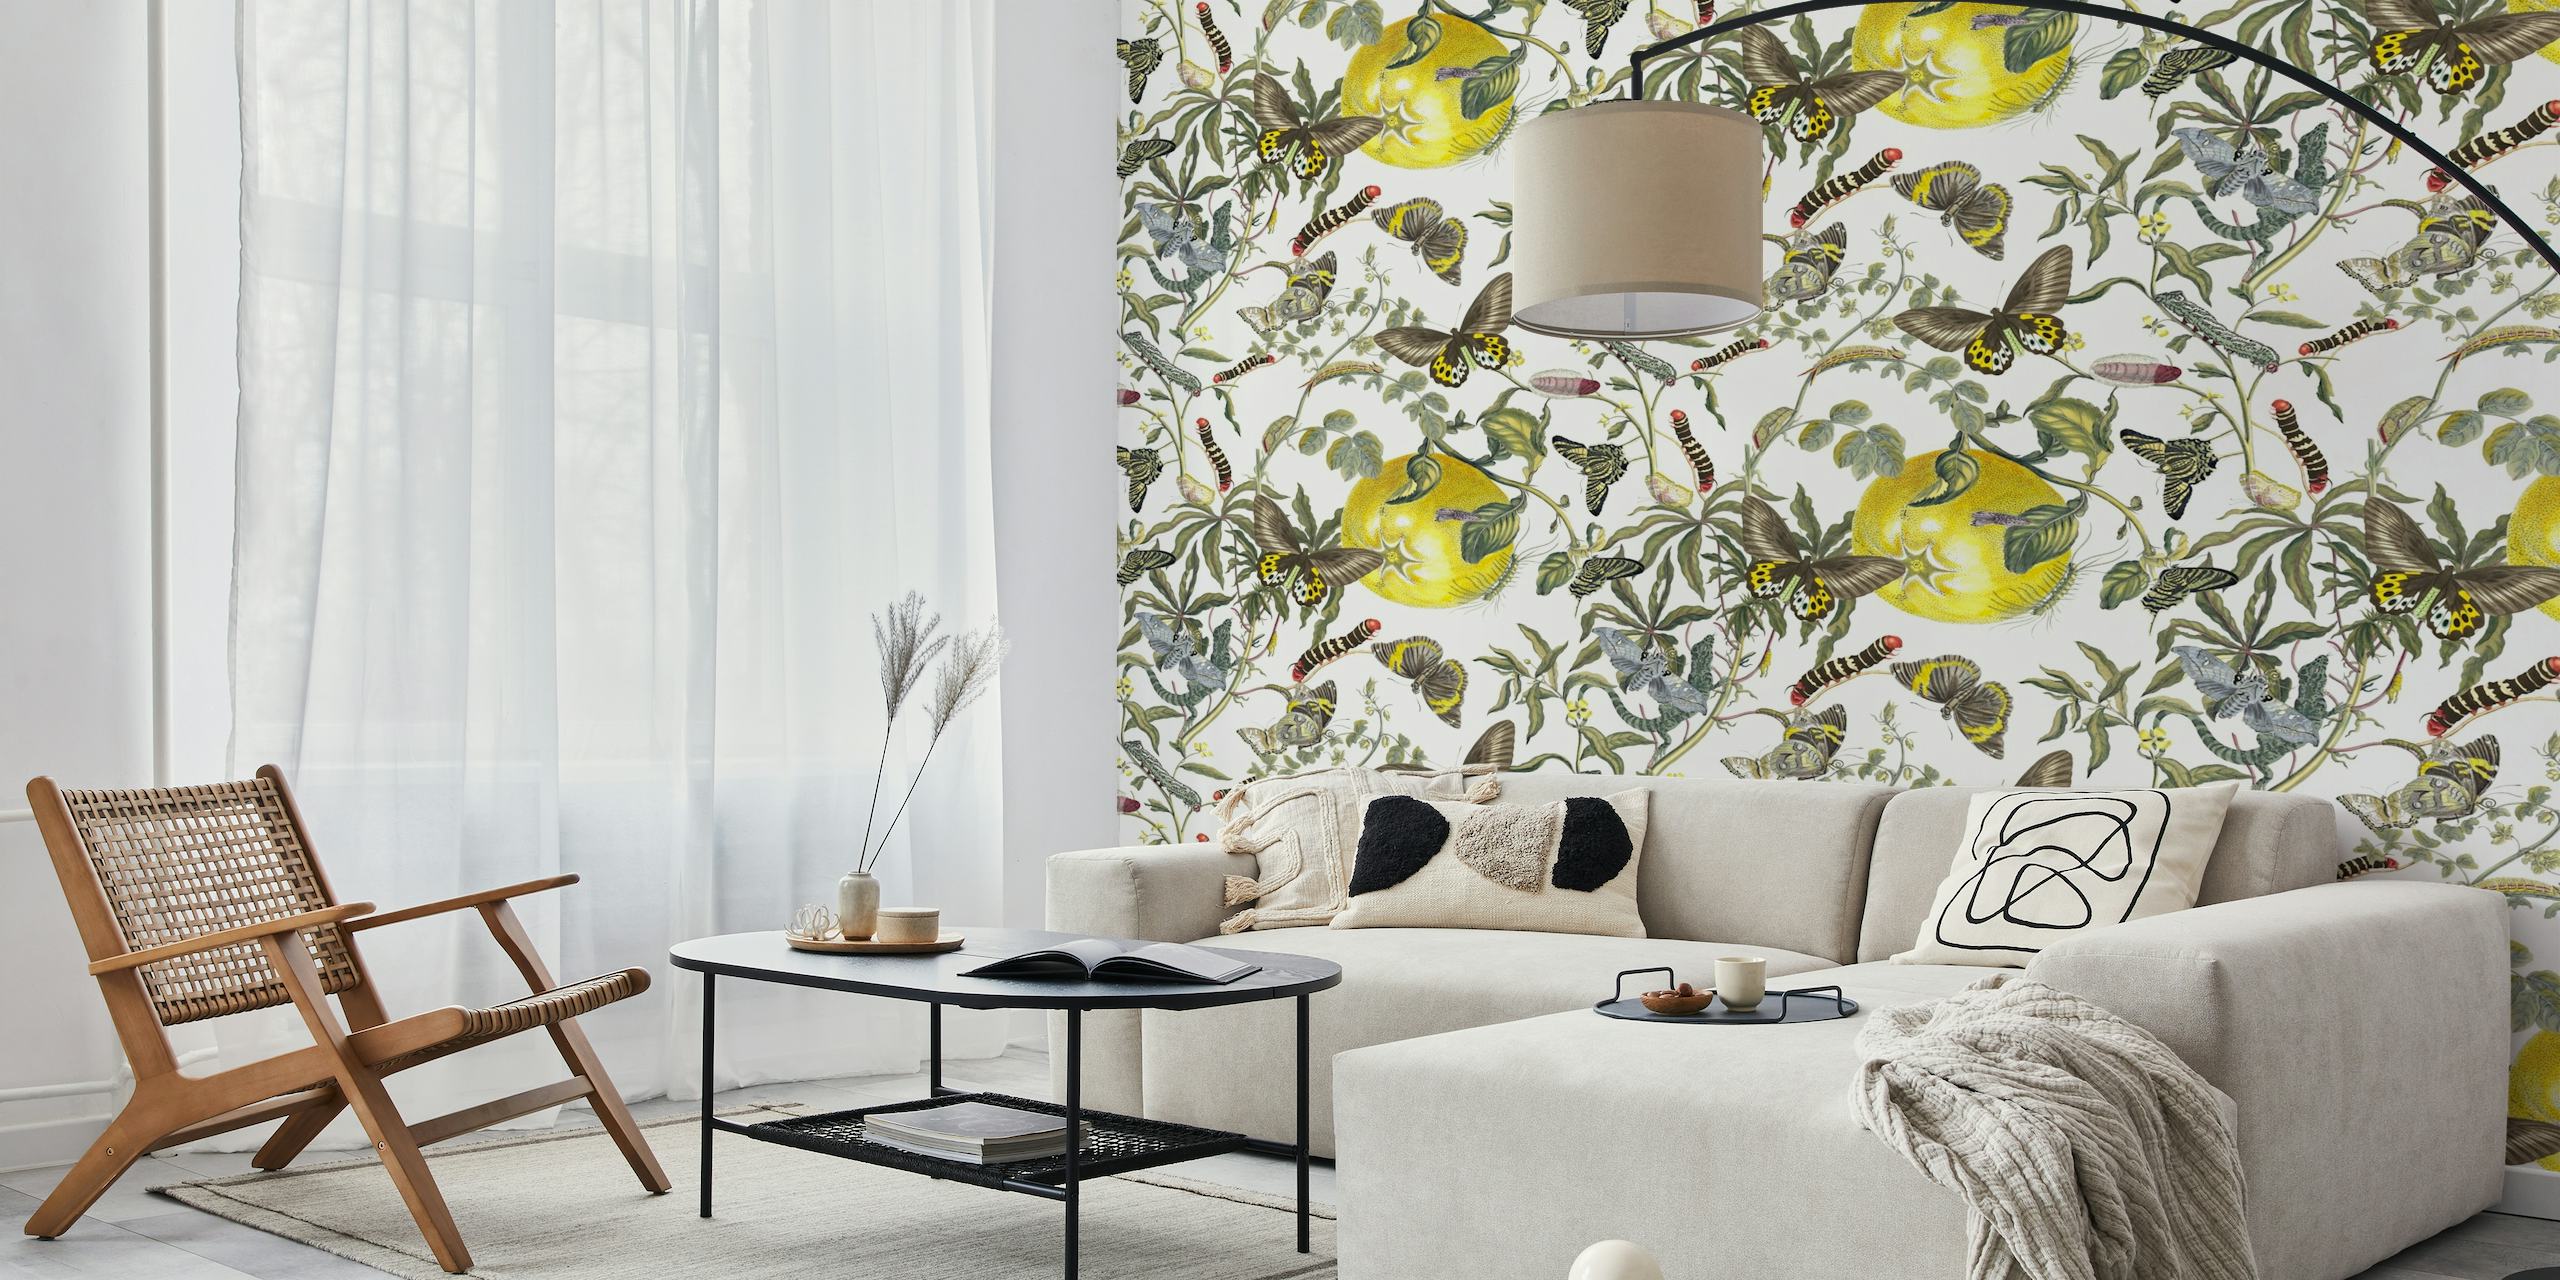 Botanic Fiorenzo wall mural depicting butterflies, birds, and foliage on a light background